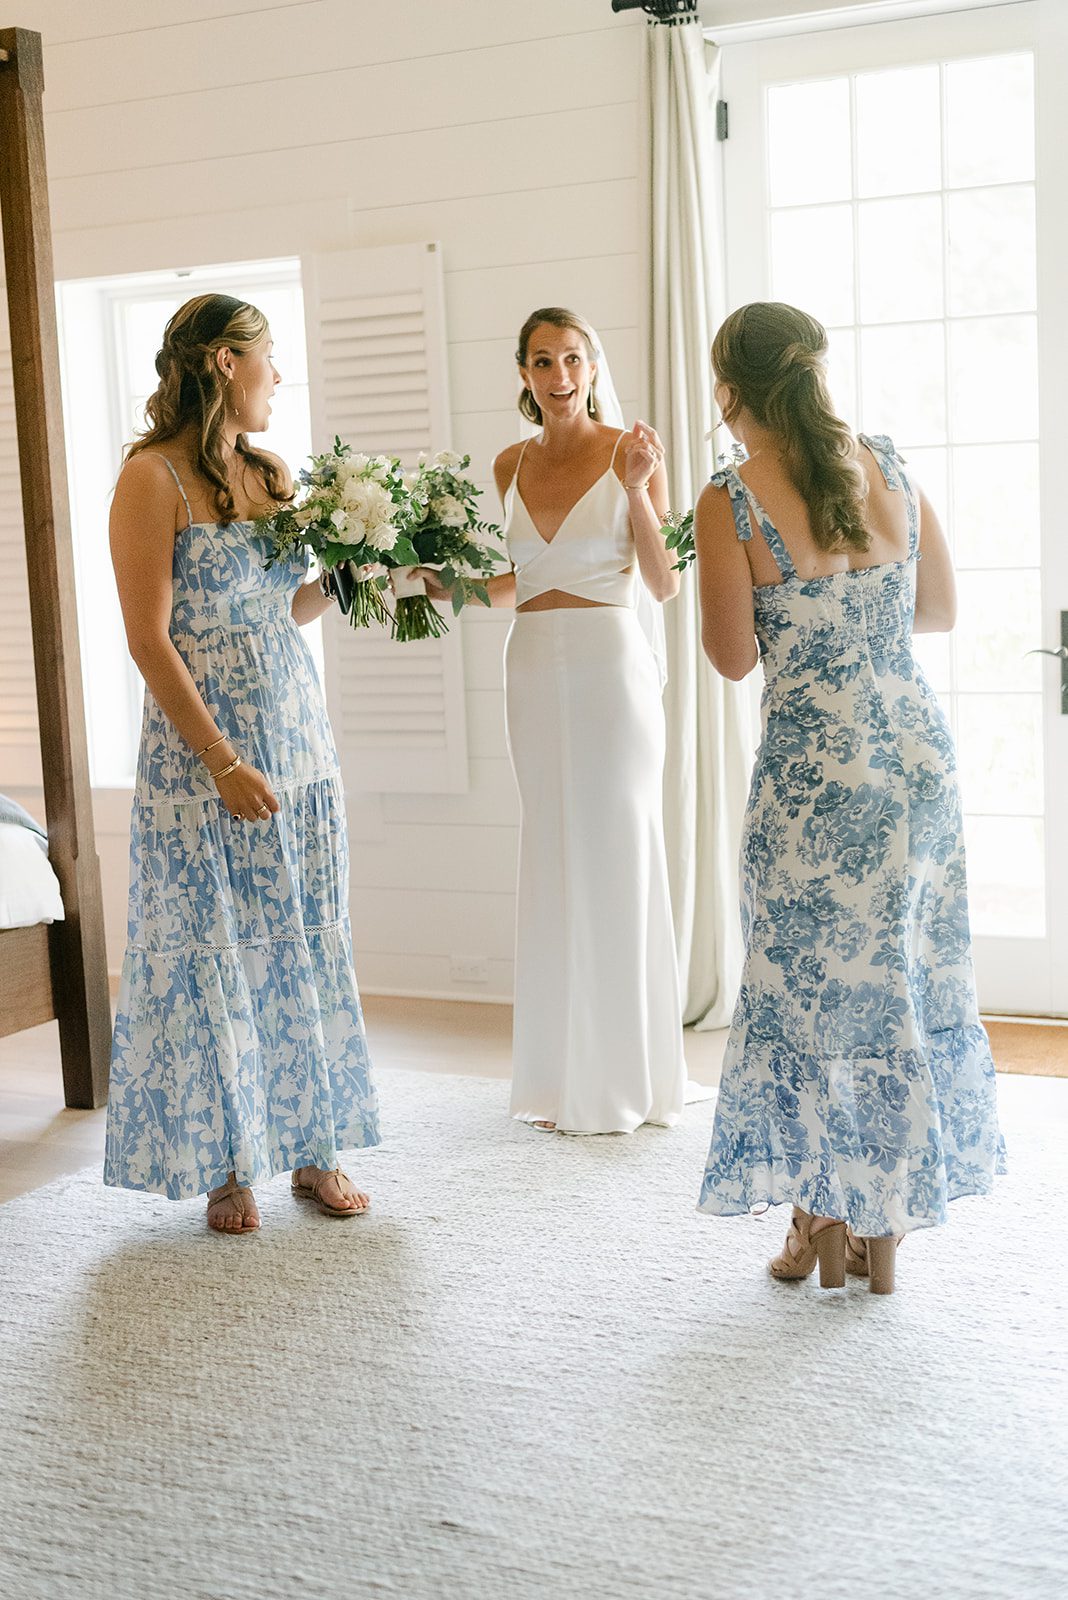 Getting ready at the suite -Kate Uhry photography